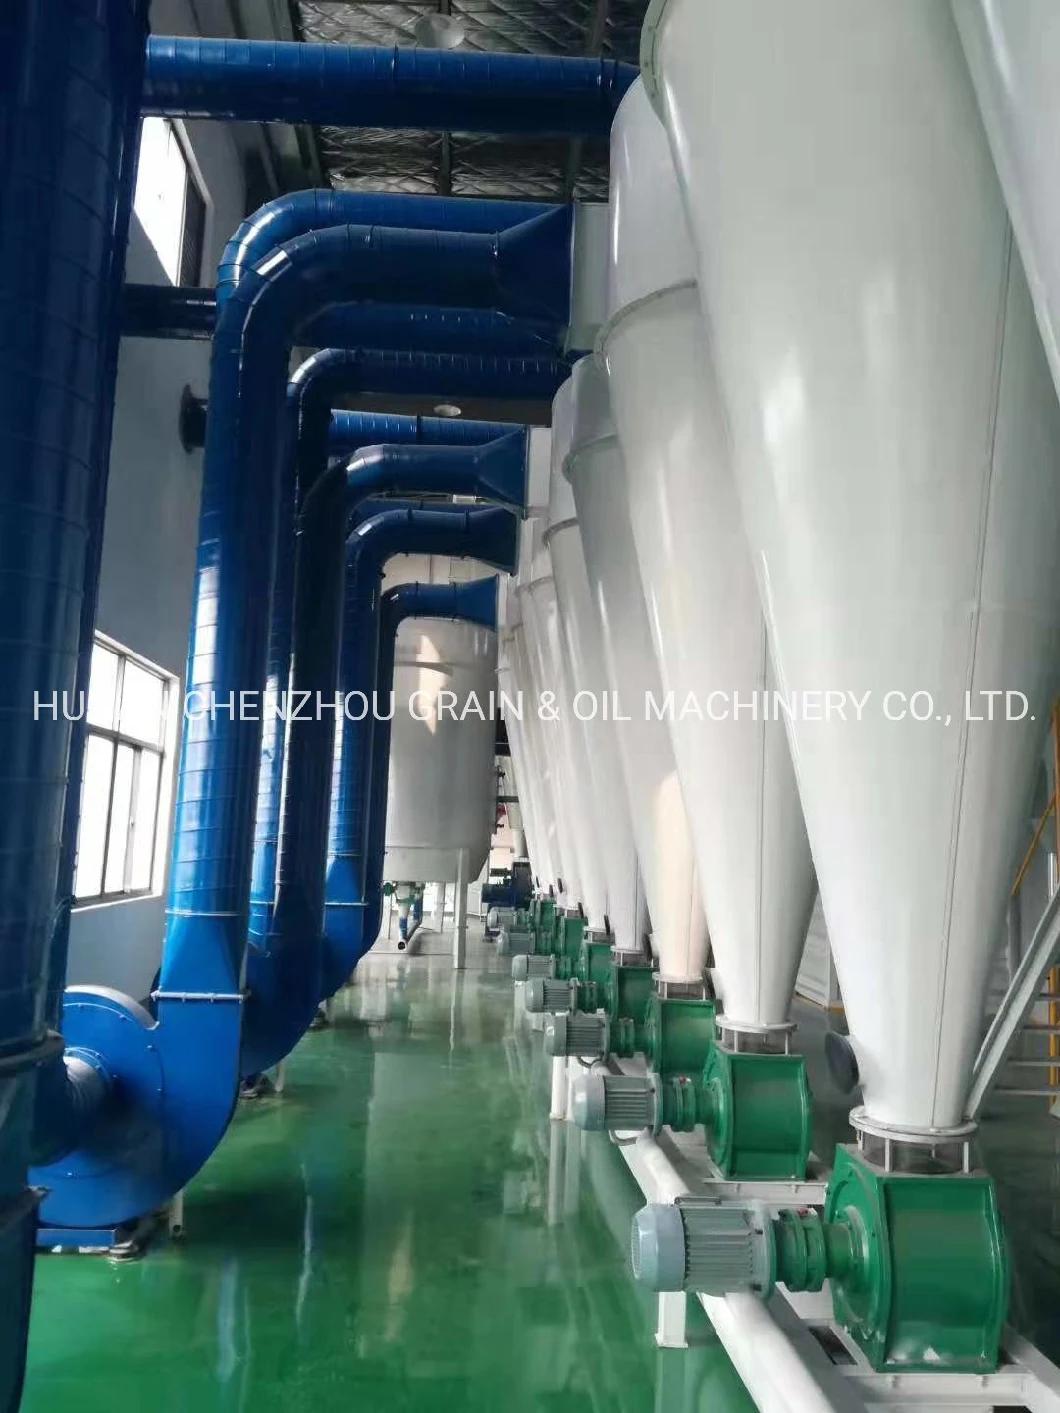 300tpd Parboiling Automatic Rice Milling Bangladesh